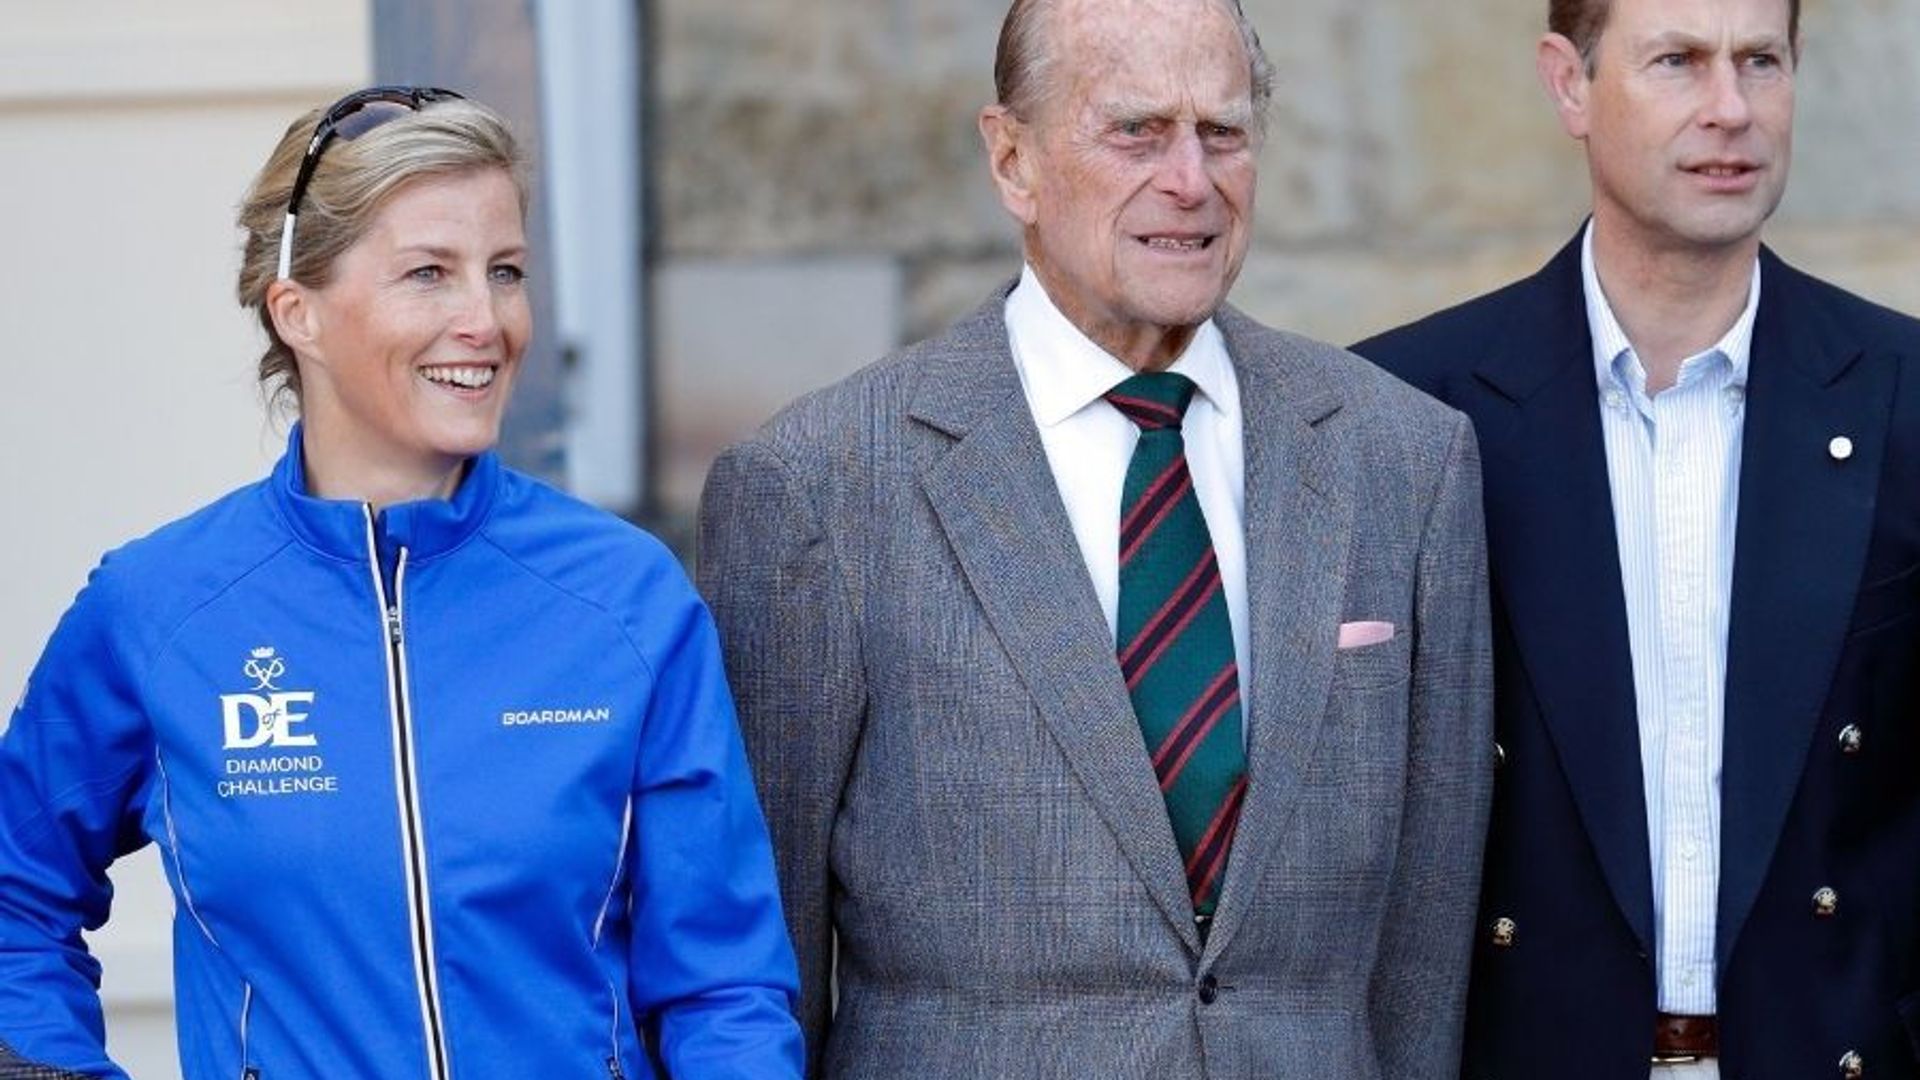 'A giant-sized hole in our lives': The Countess of Wessex opens up about grief after Prince Philip's death